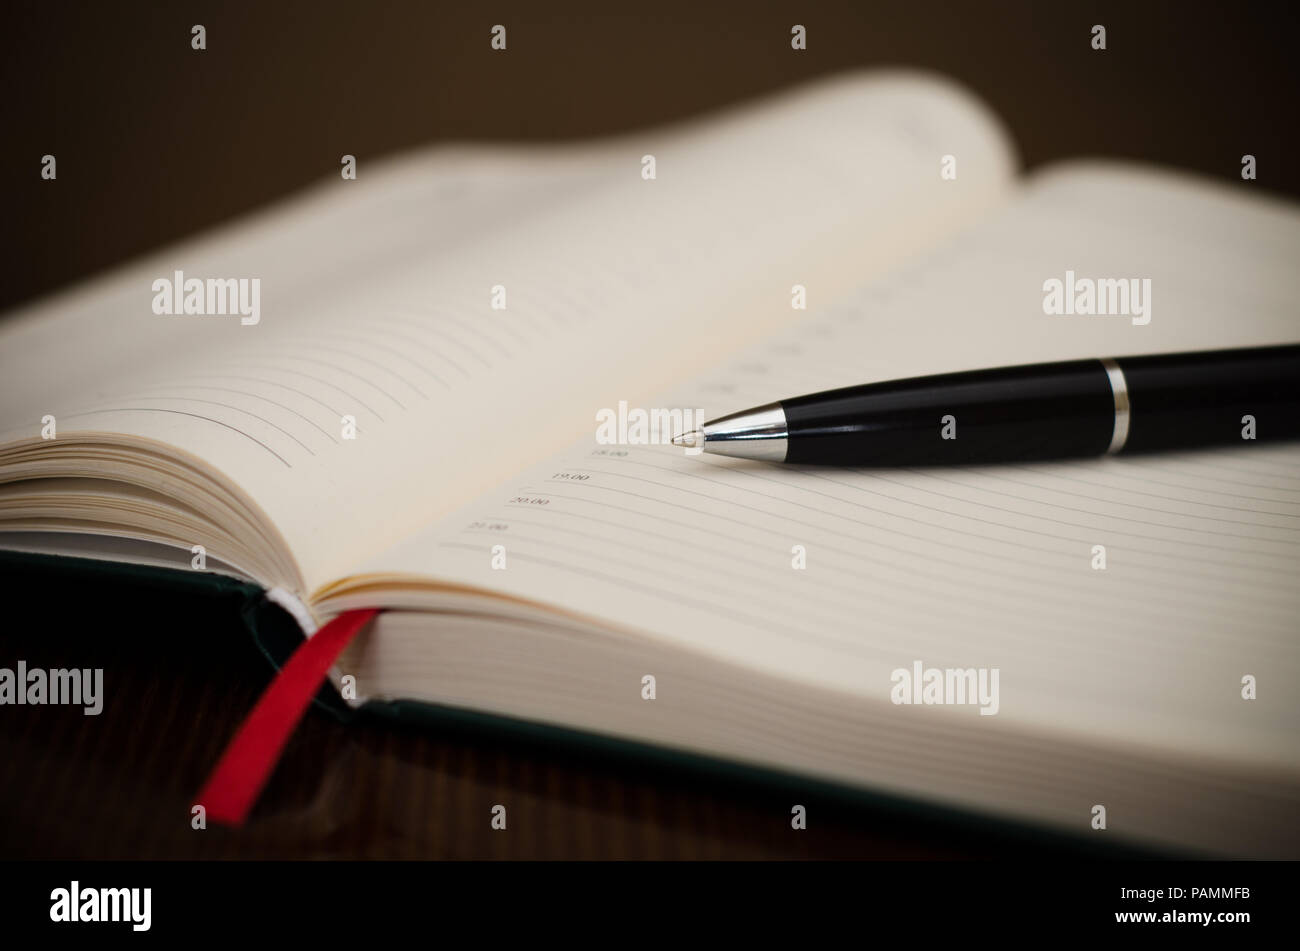 Schedule with a pen and a red ribbon at work with a bussines look Stock Photo